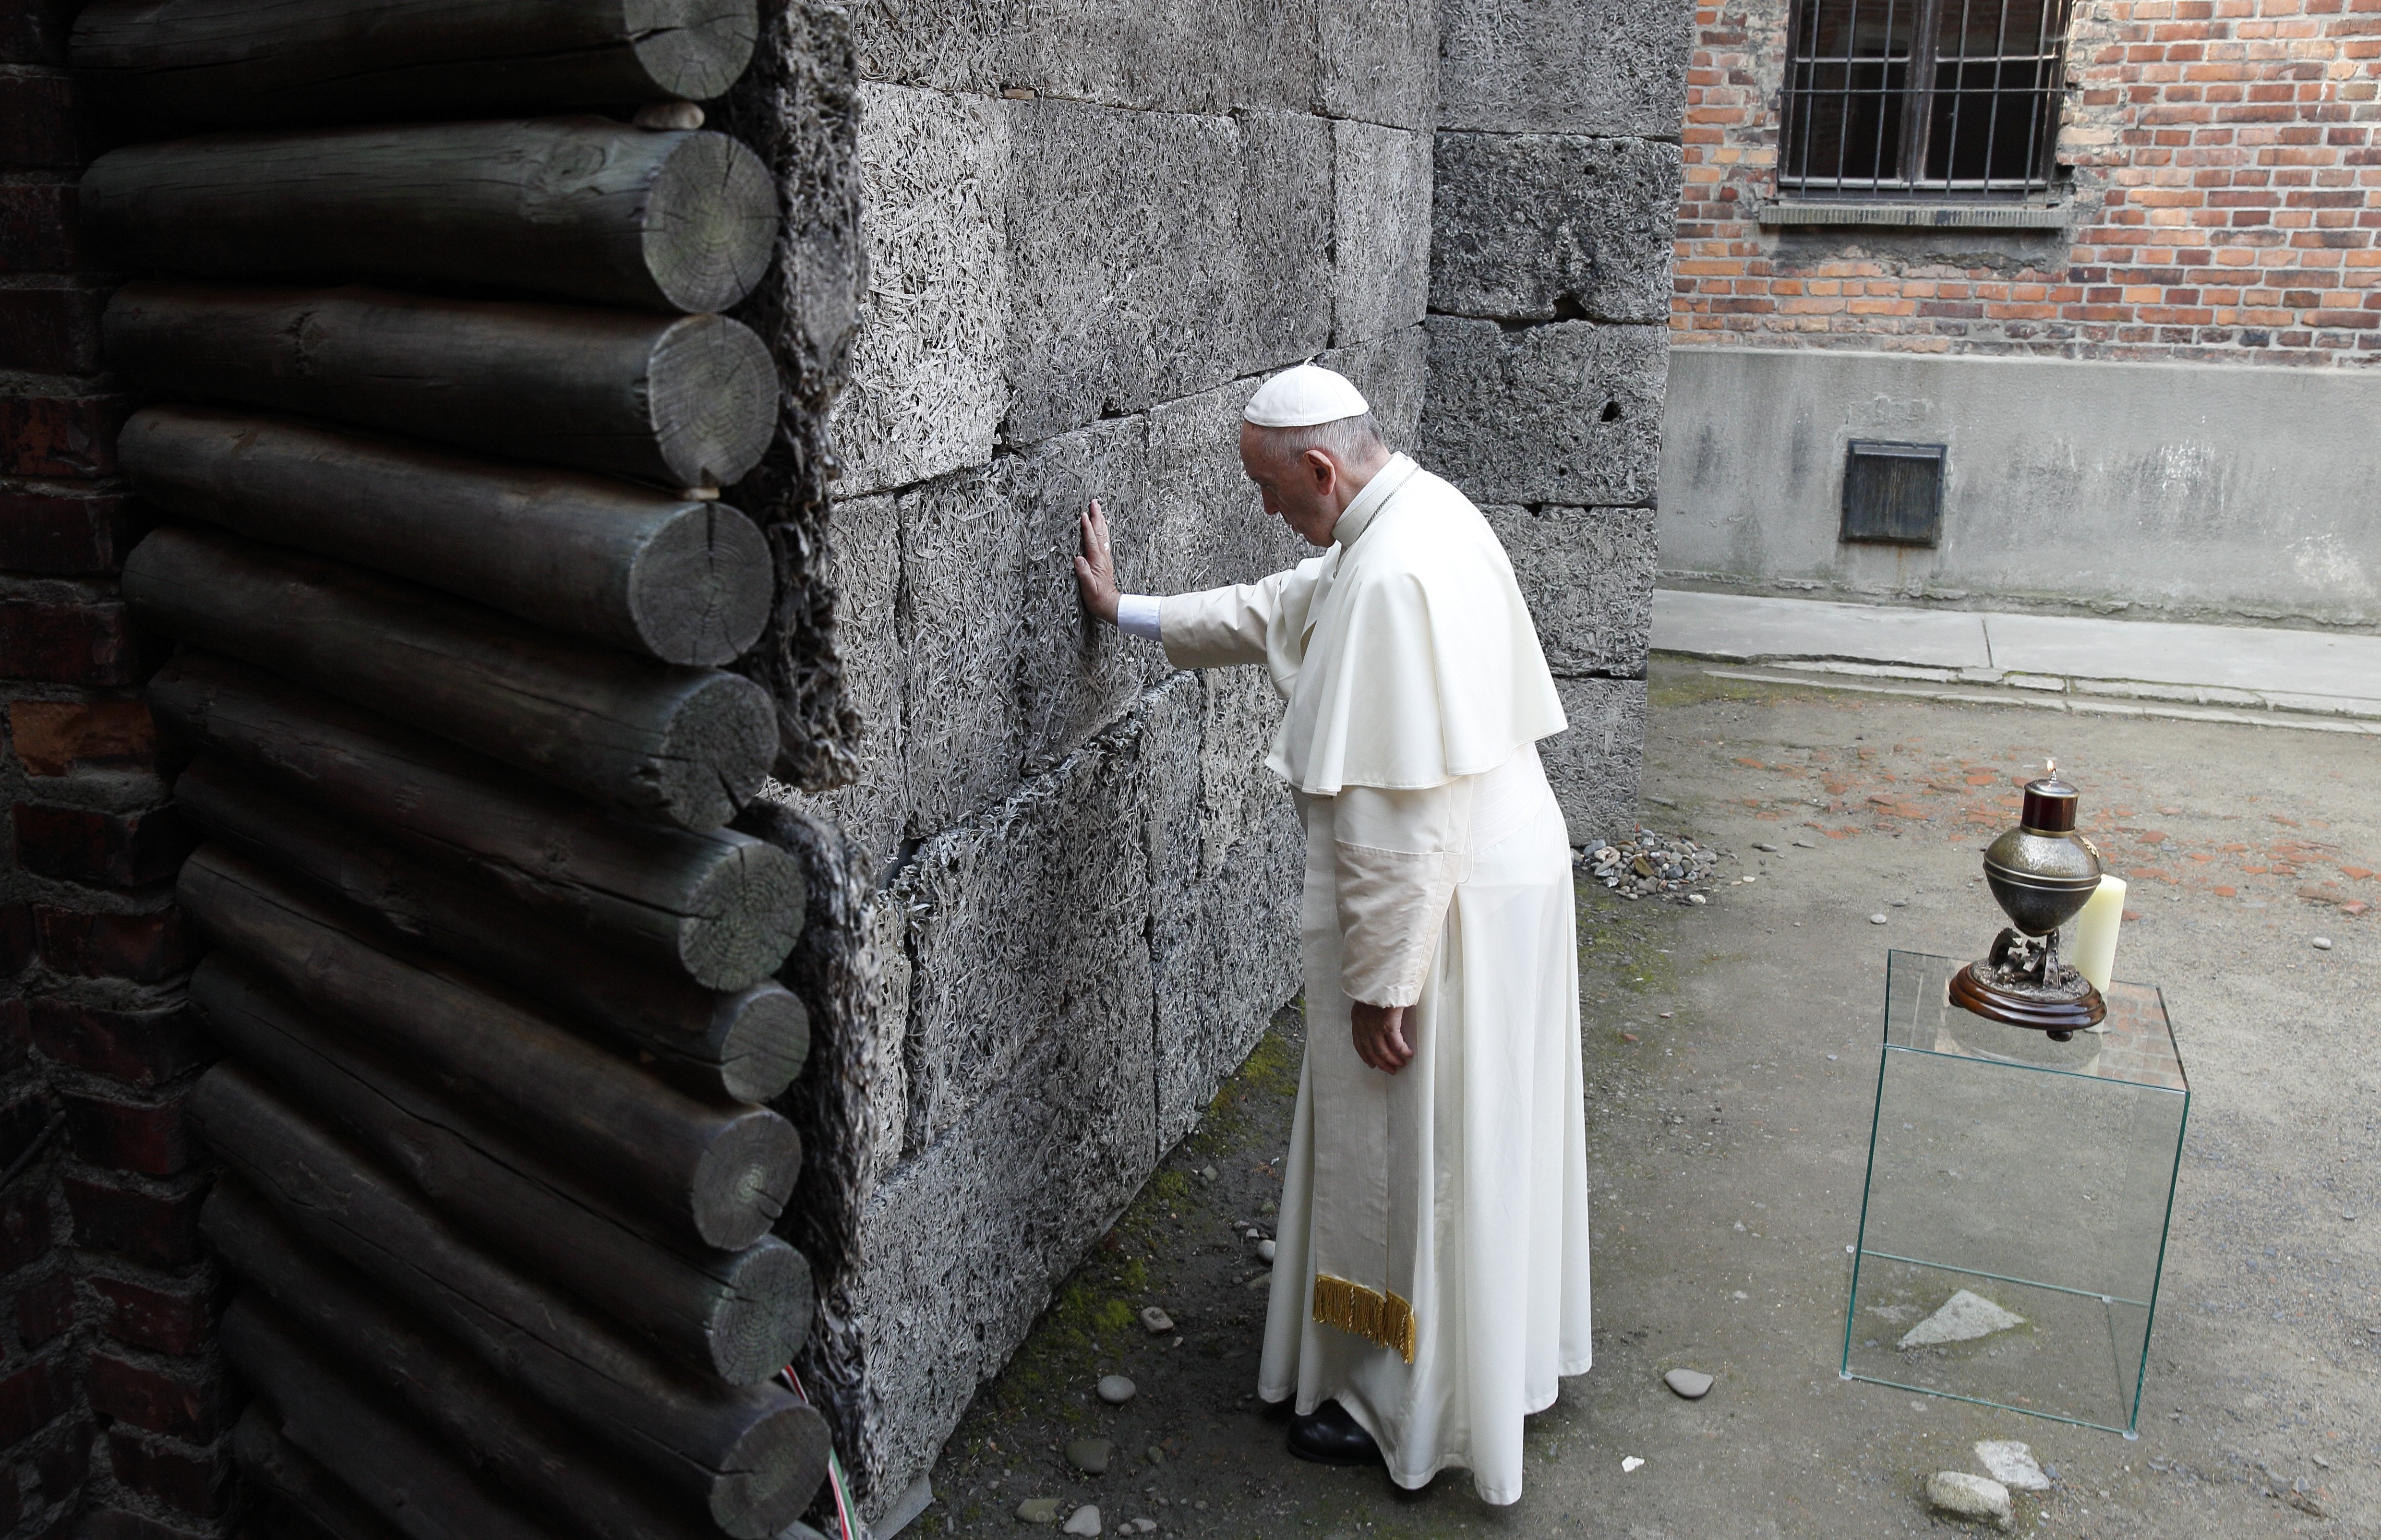 Pope Francis touches the death wall at the Auschwitz Nazi death camp in Oswiecim, Poland, in this July 29, 2016, file photo. (CNS/Paul Haring)